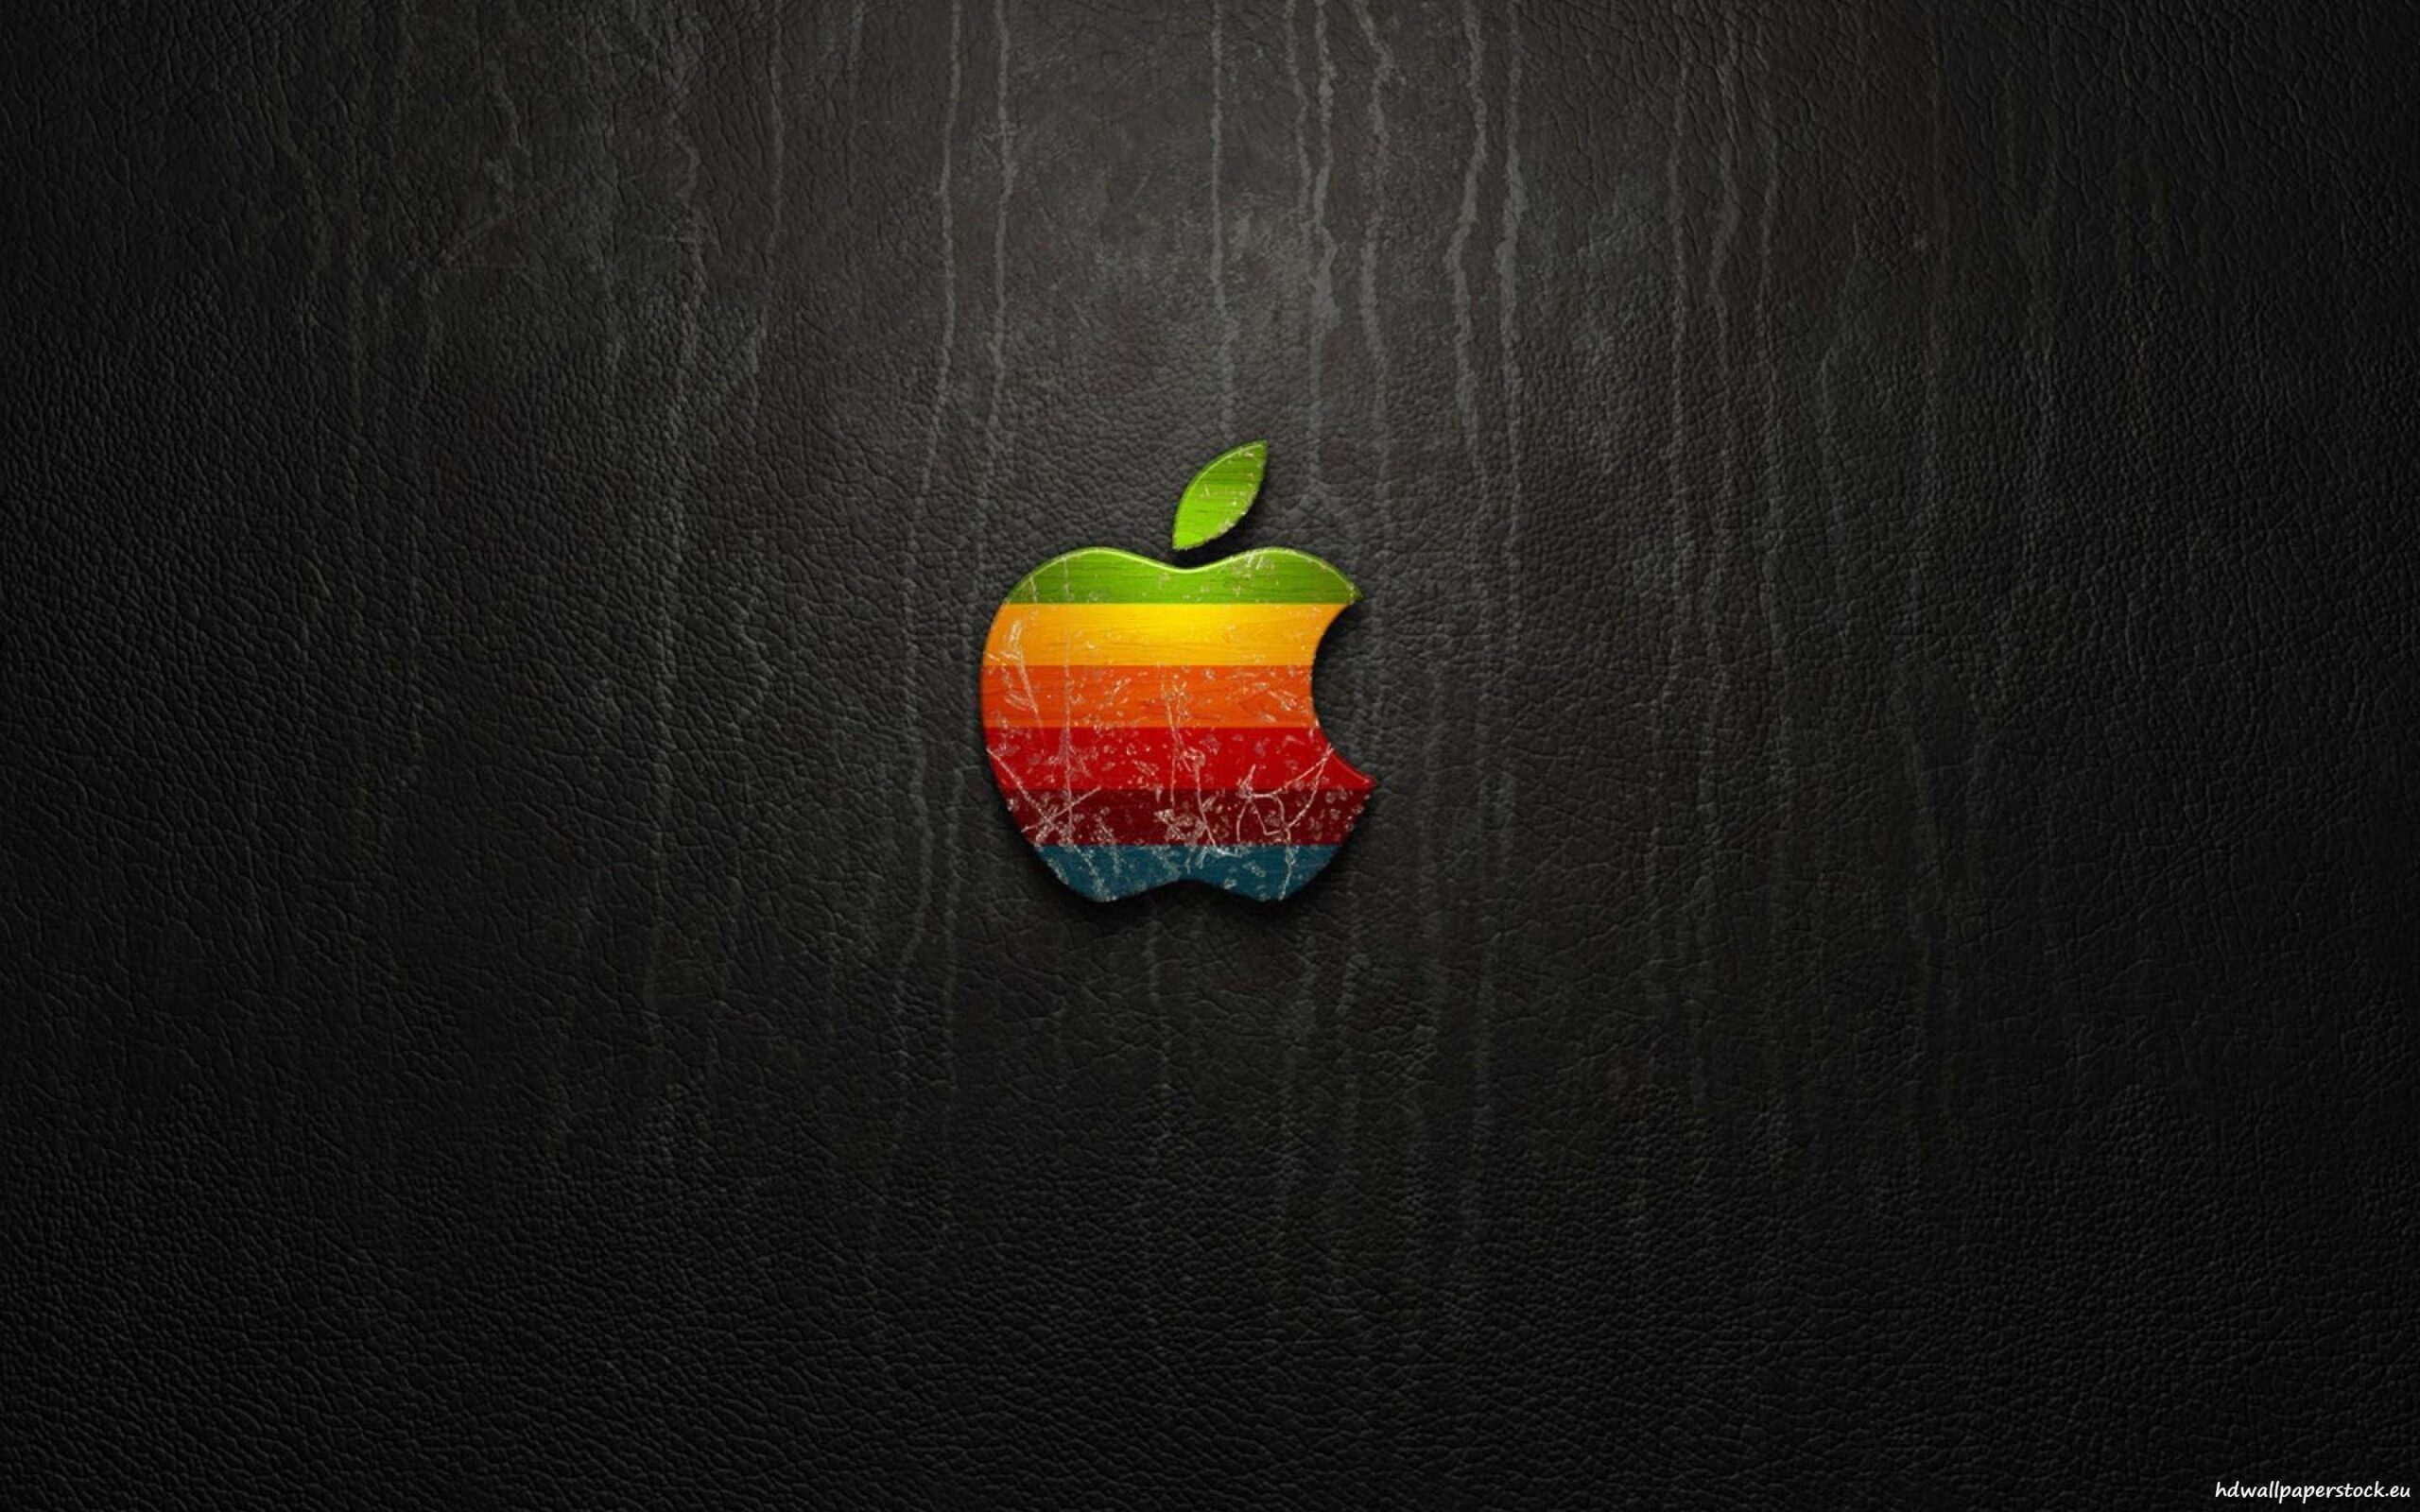 Apple Tower Theatre Apple Logo iPhone Wallpaper HD - iPhone Wallpapers